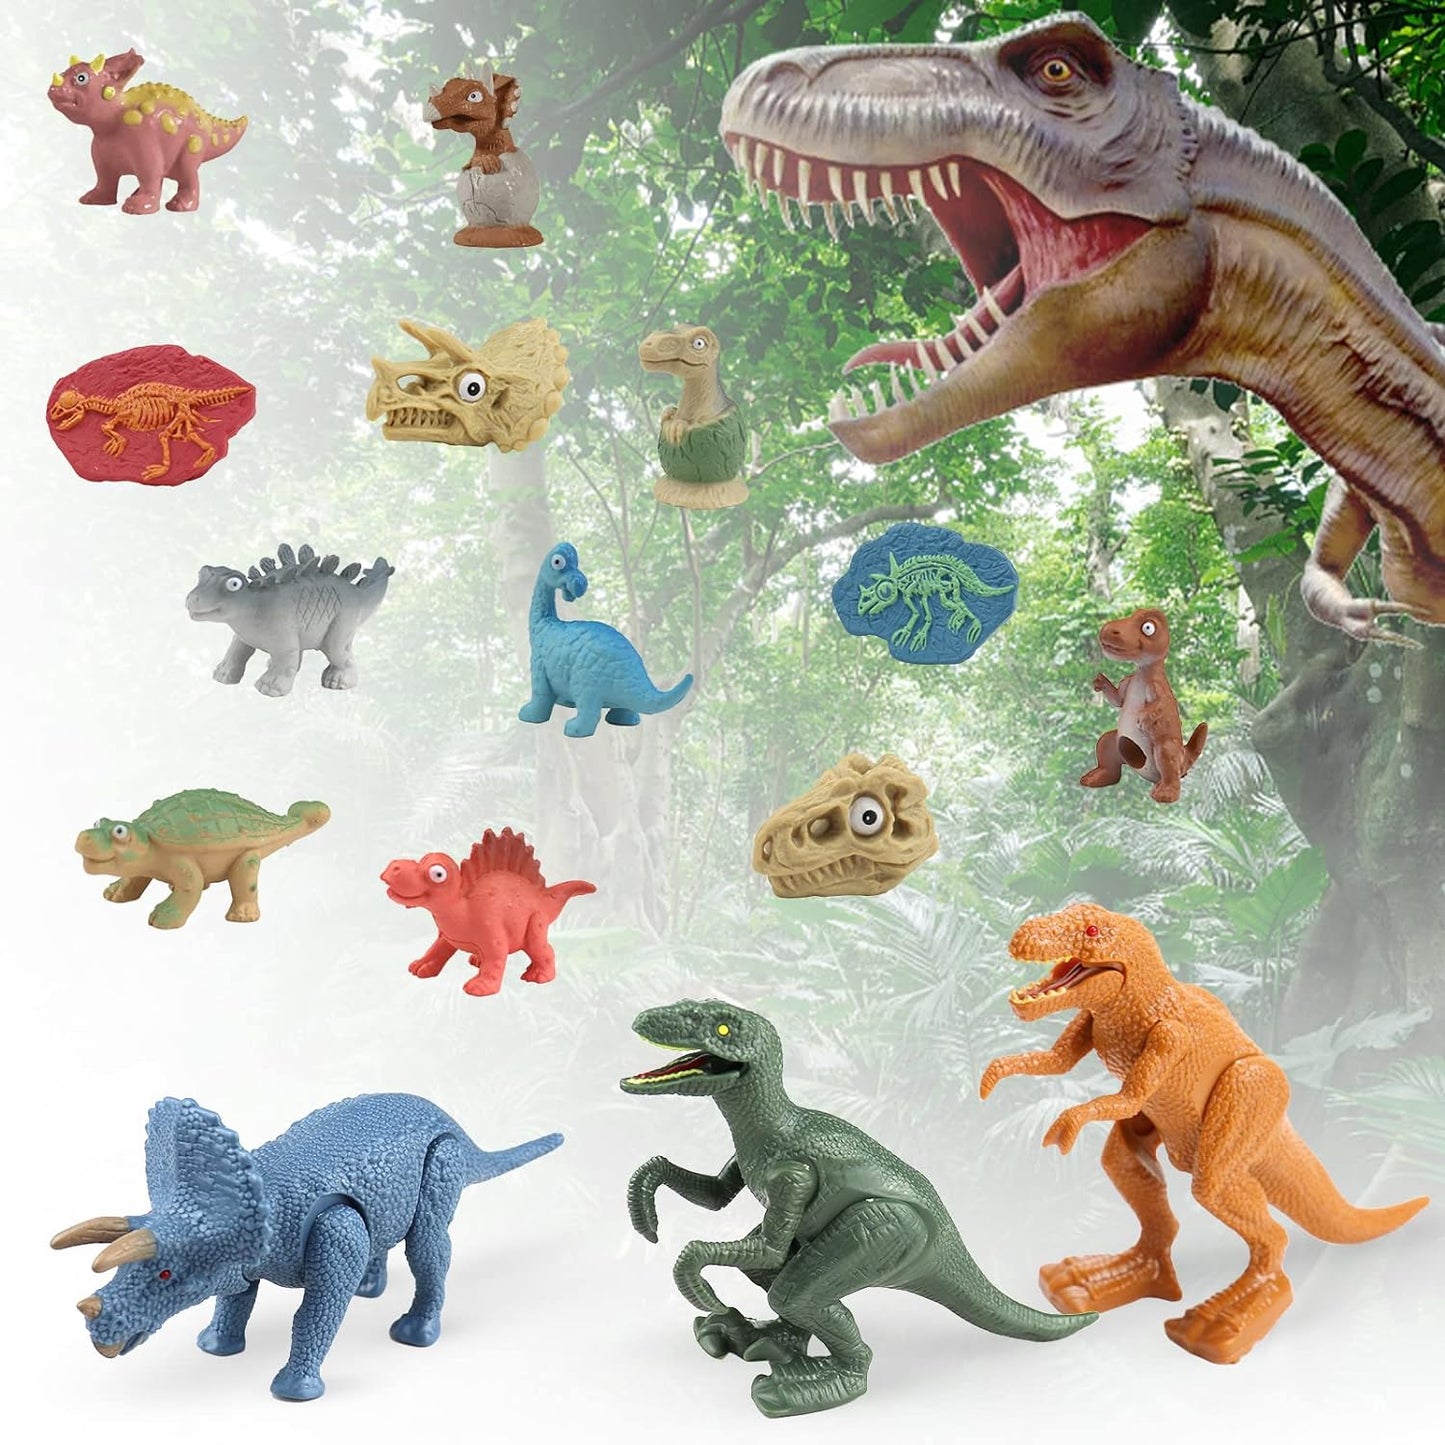 Easter Dinosaur Eggs Toys for Kids, Dinosaur Figures Reusable Dinosaur Fossils Surprise Egg Educational Toy Girls Boys Birthday Gifts Dinosaur Collection Toy for Kids 3 4 5 6 7 8 9 10+ Year Old